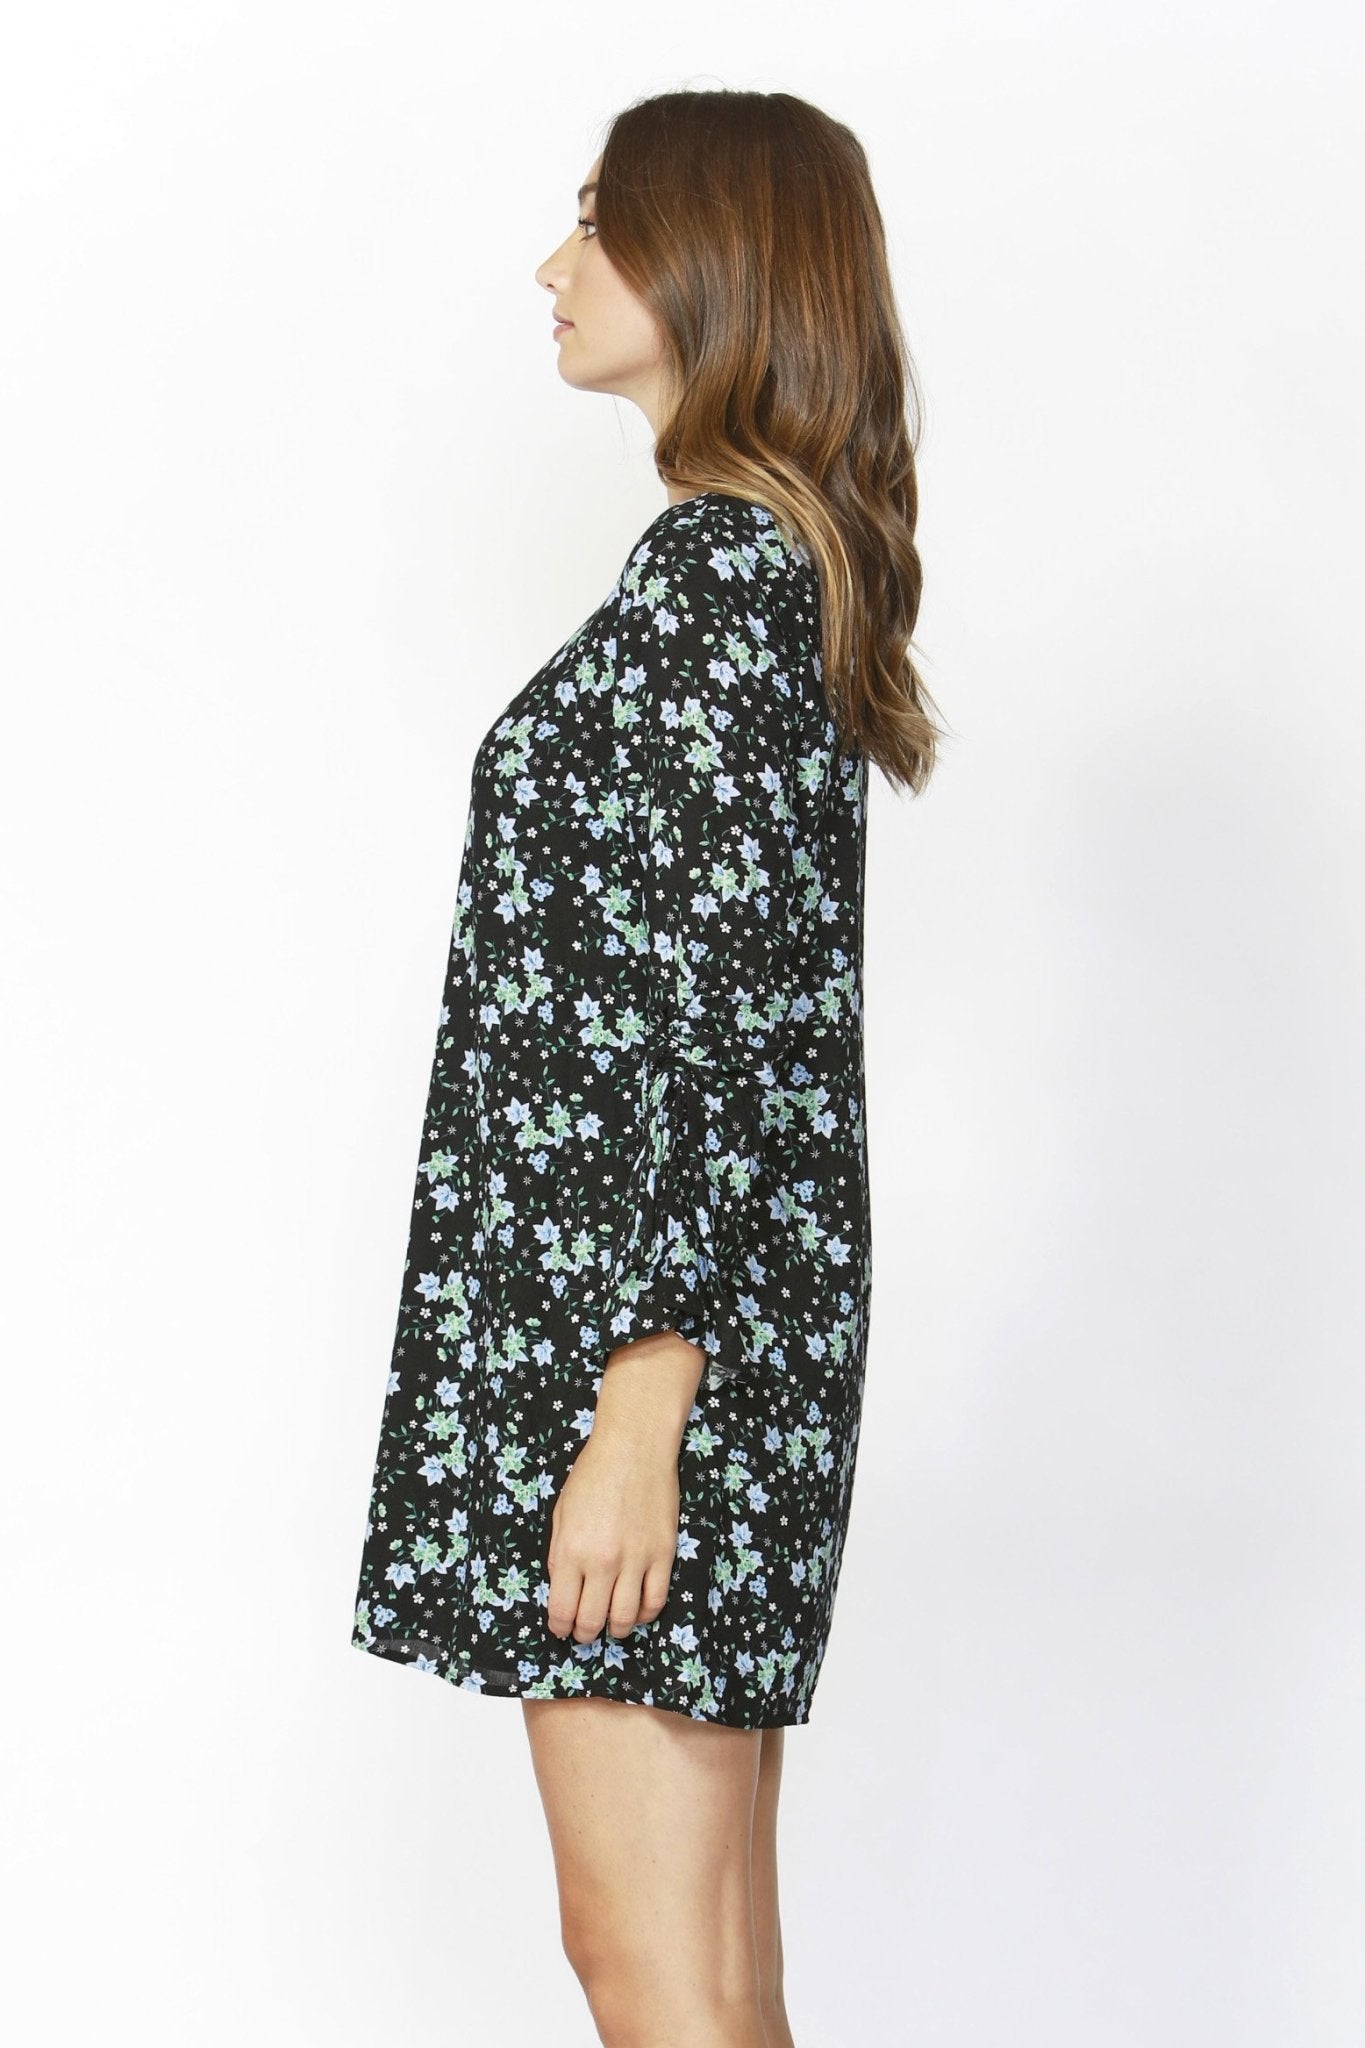 Sass Winter Forest Shift Dress in Floral Print - Hey Sara